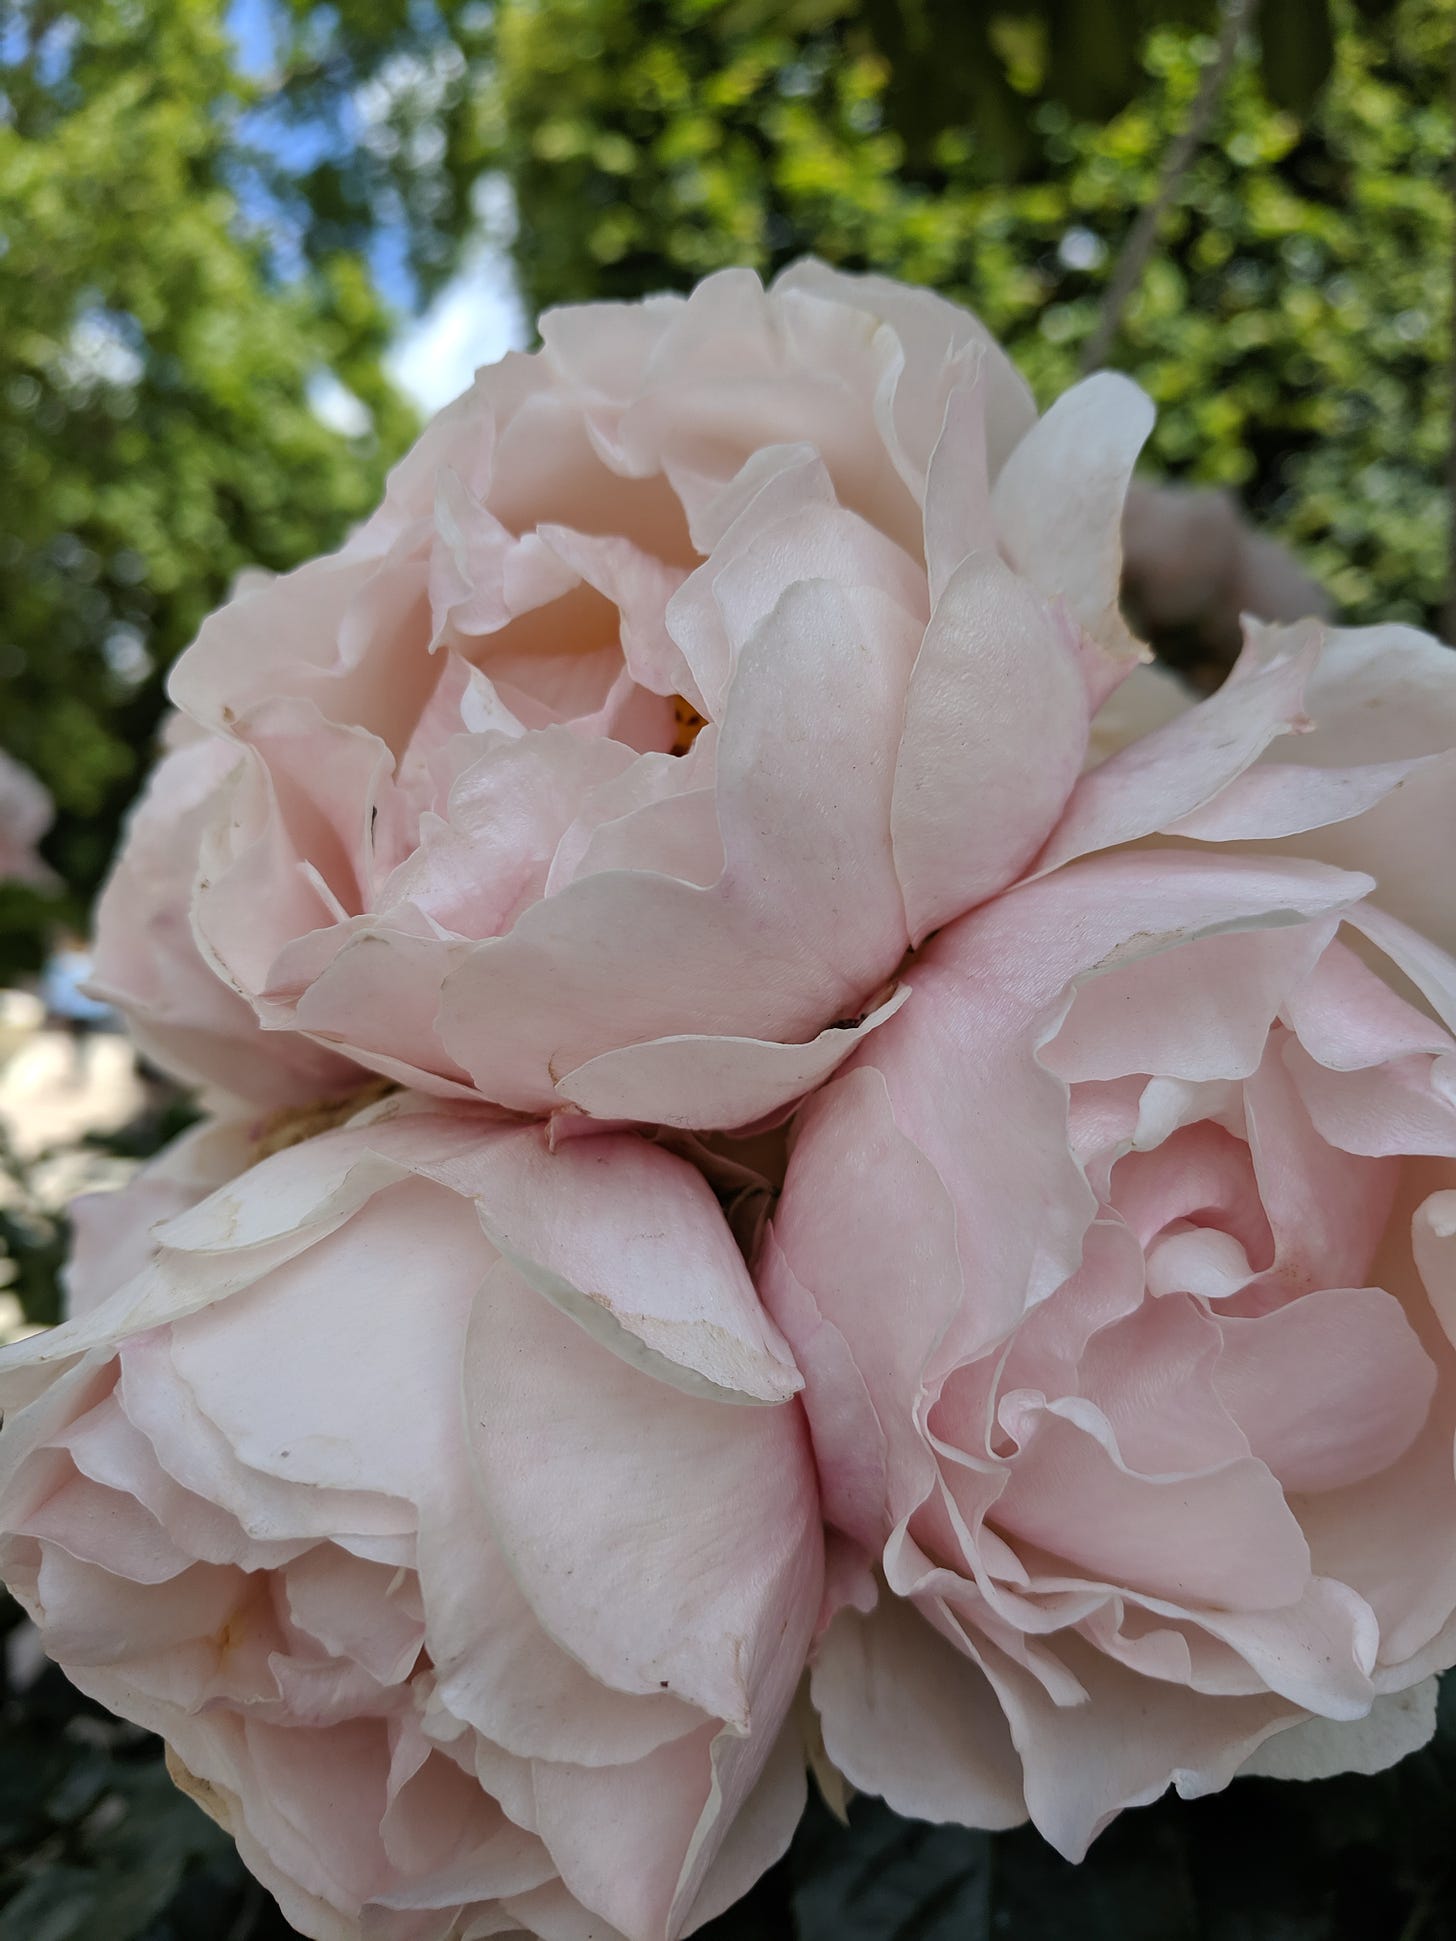 Three blousy open pale-pink garden roses